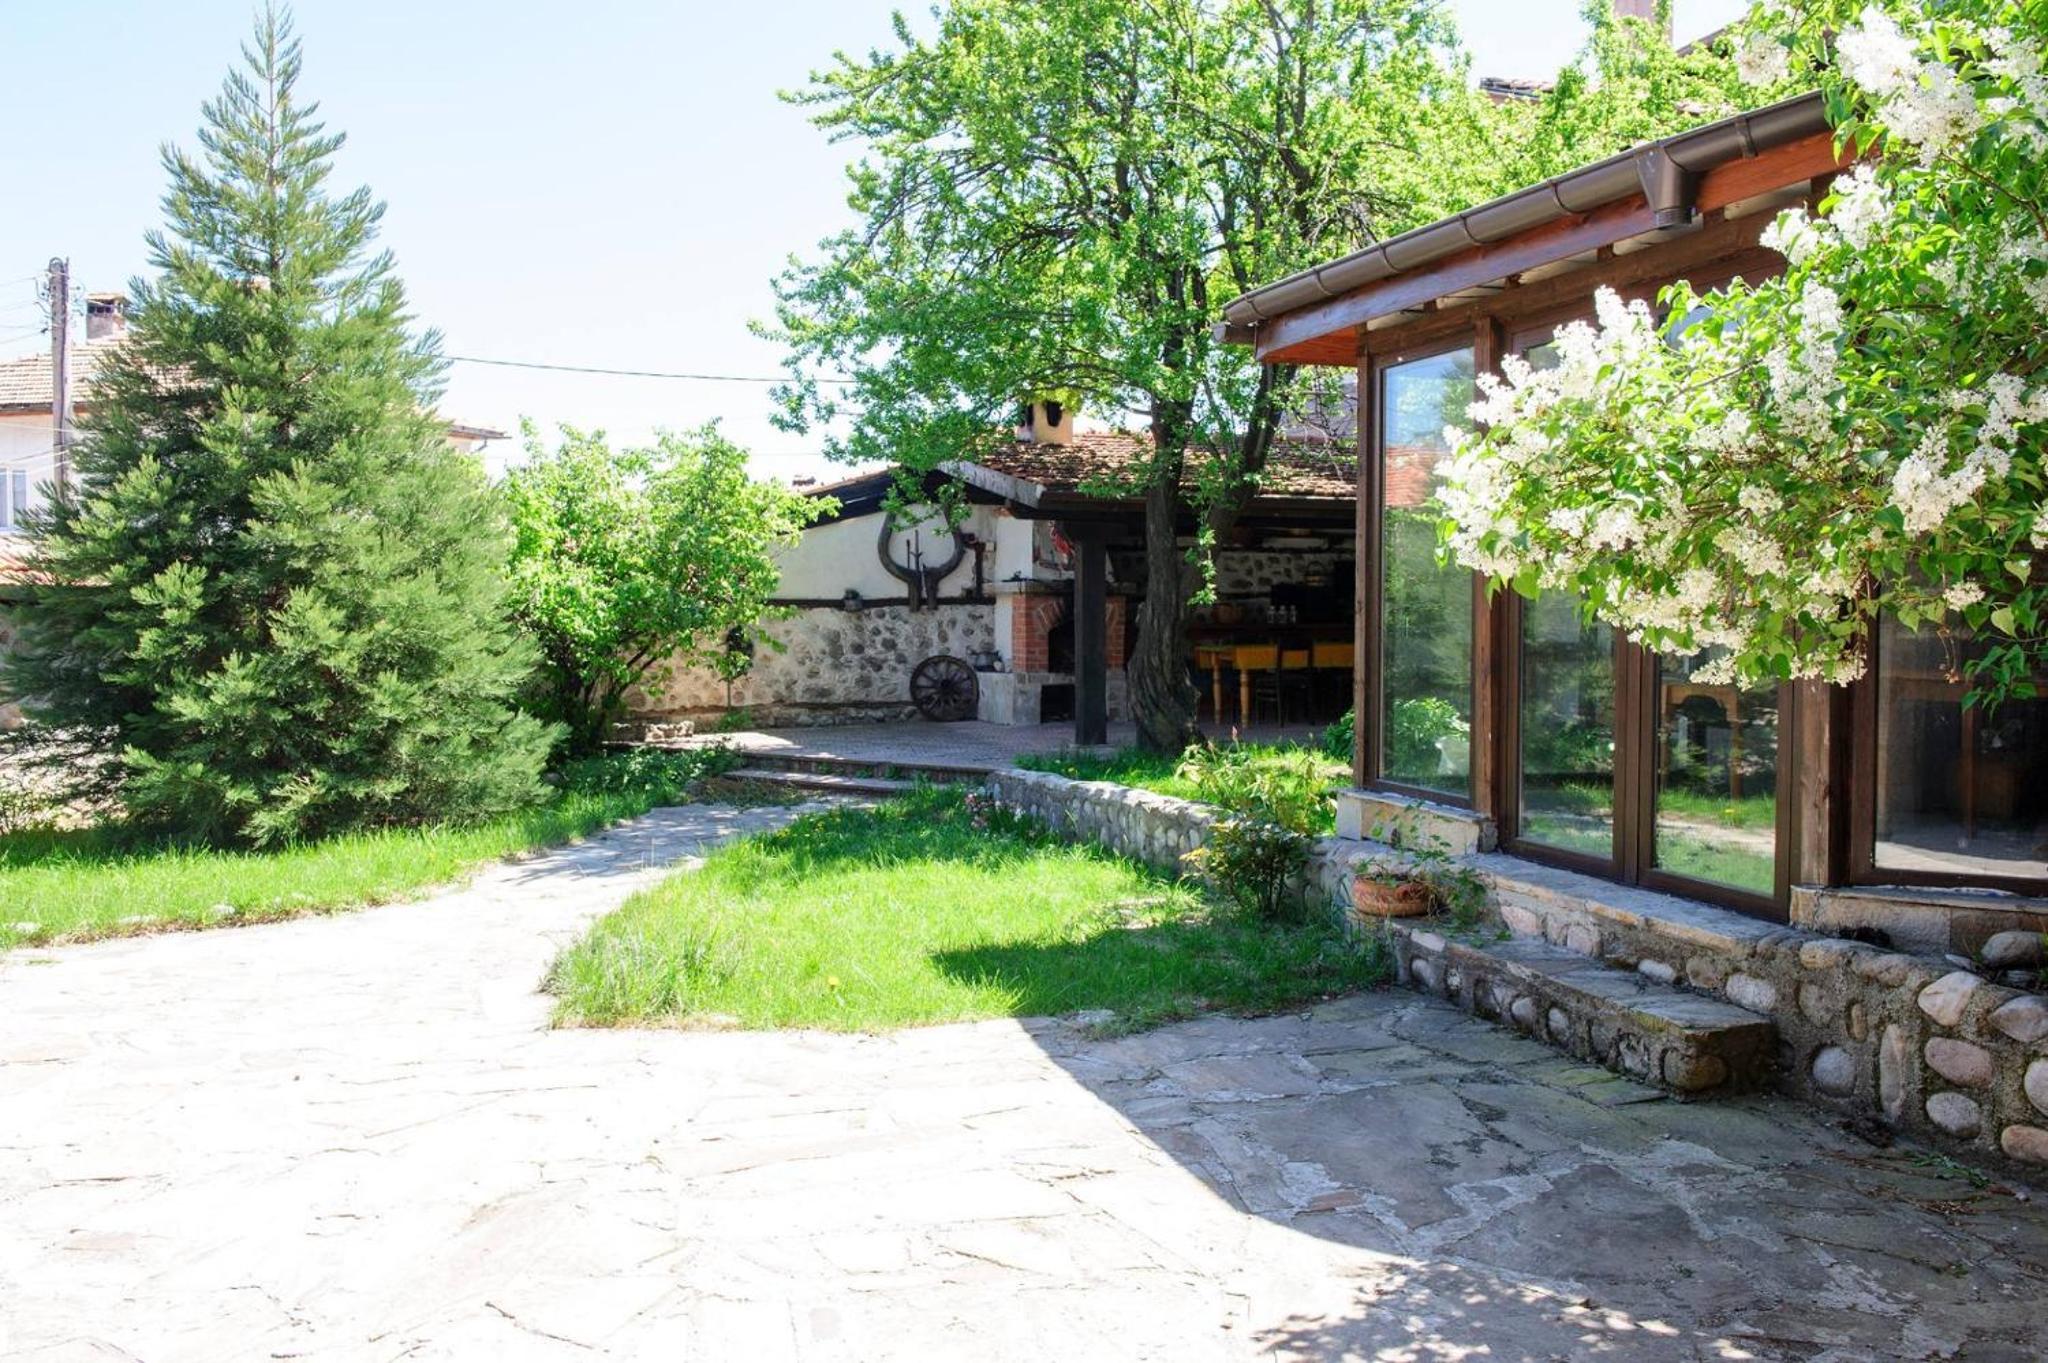 Self Catering Chalet Kulina